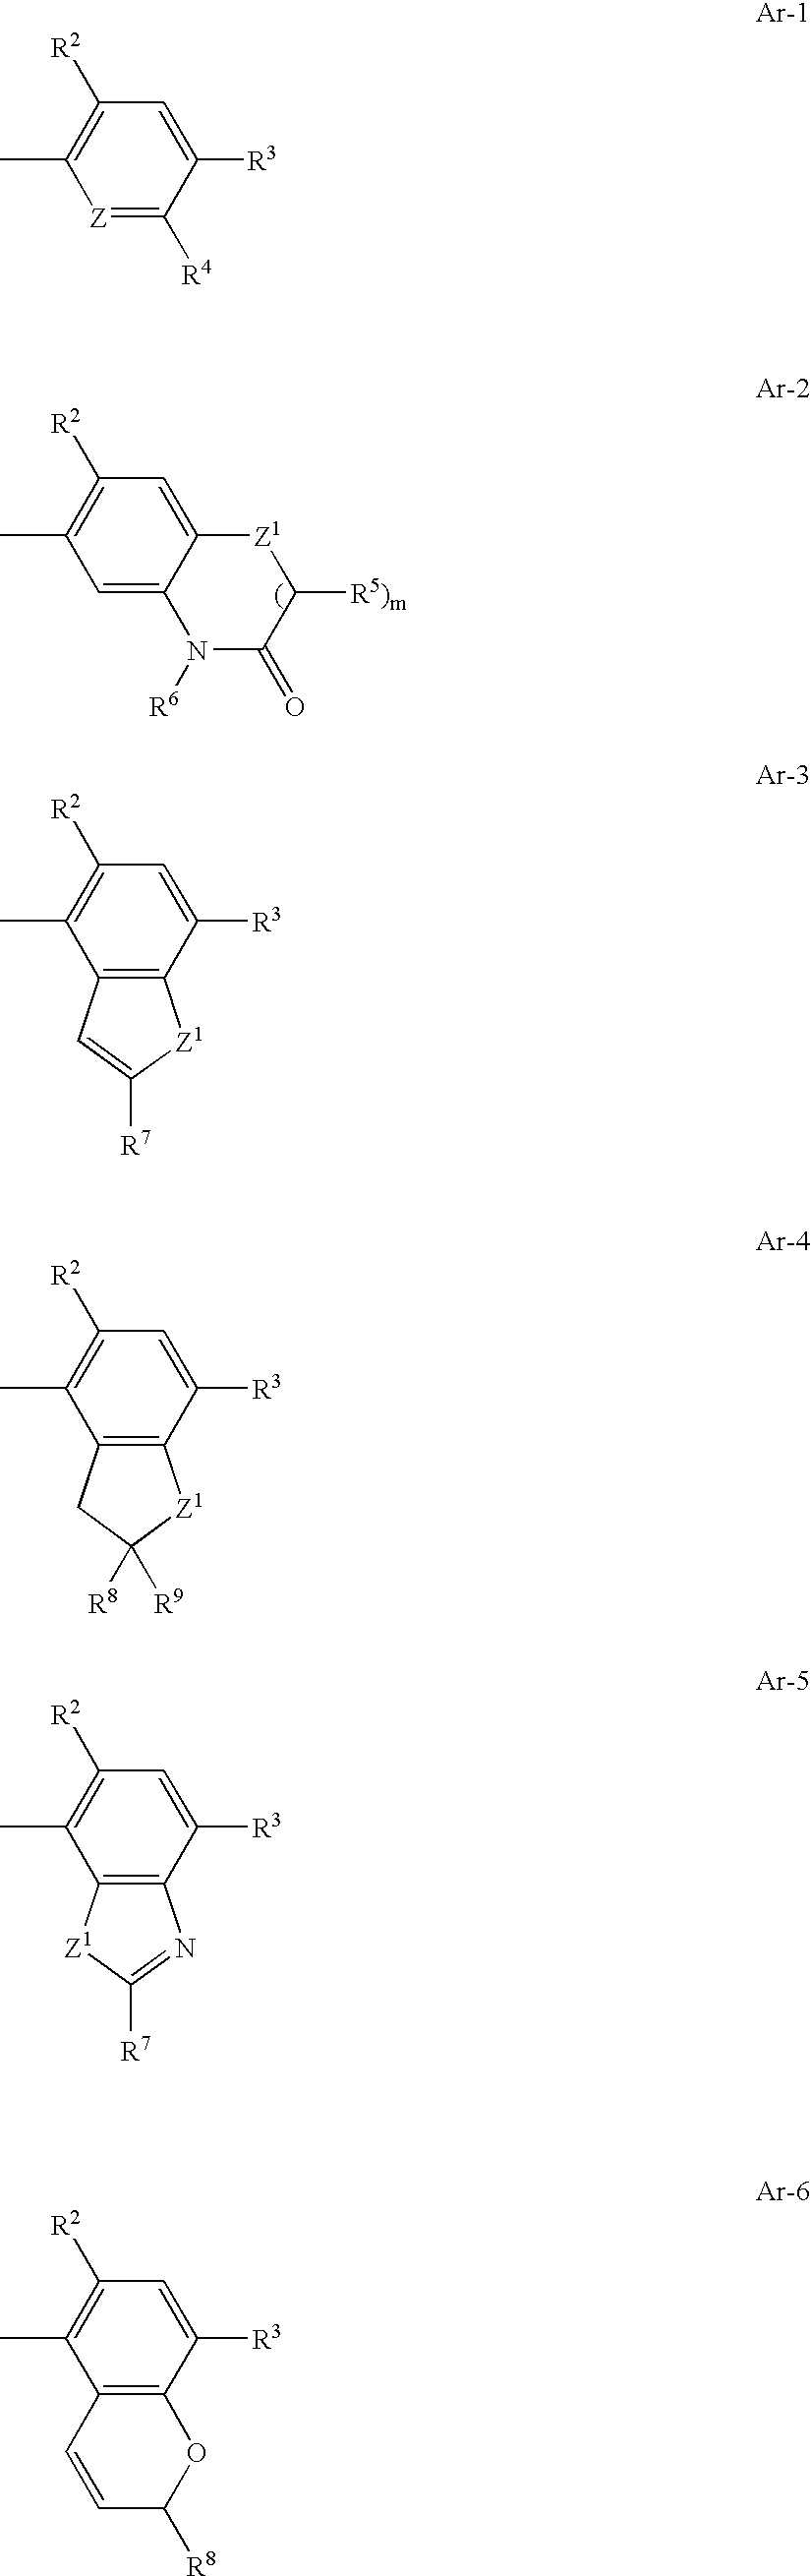 Bicyclic triazolone derivatives and a herbicides containing the same